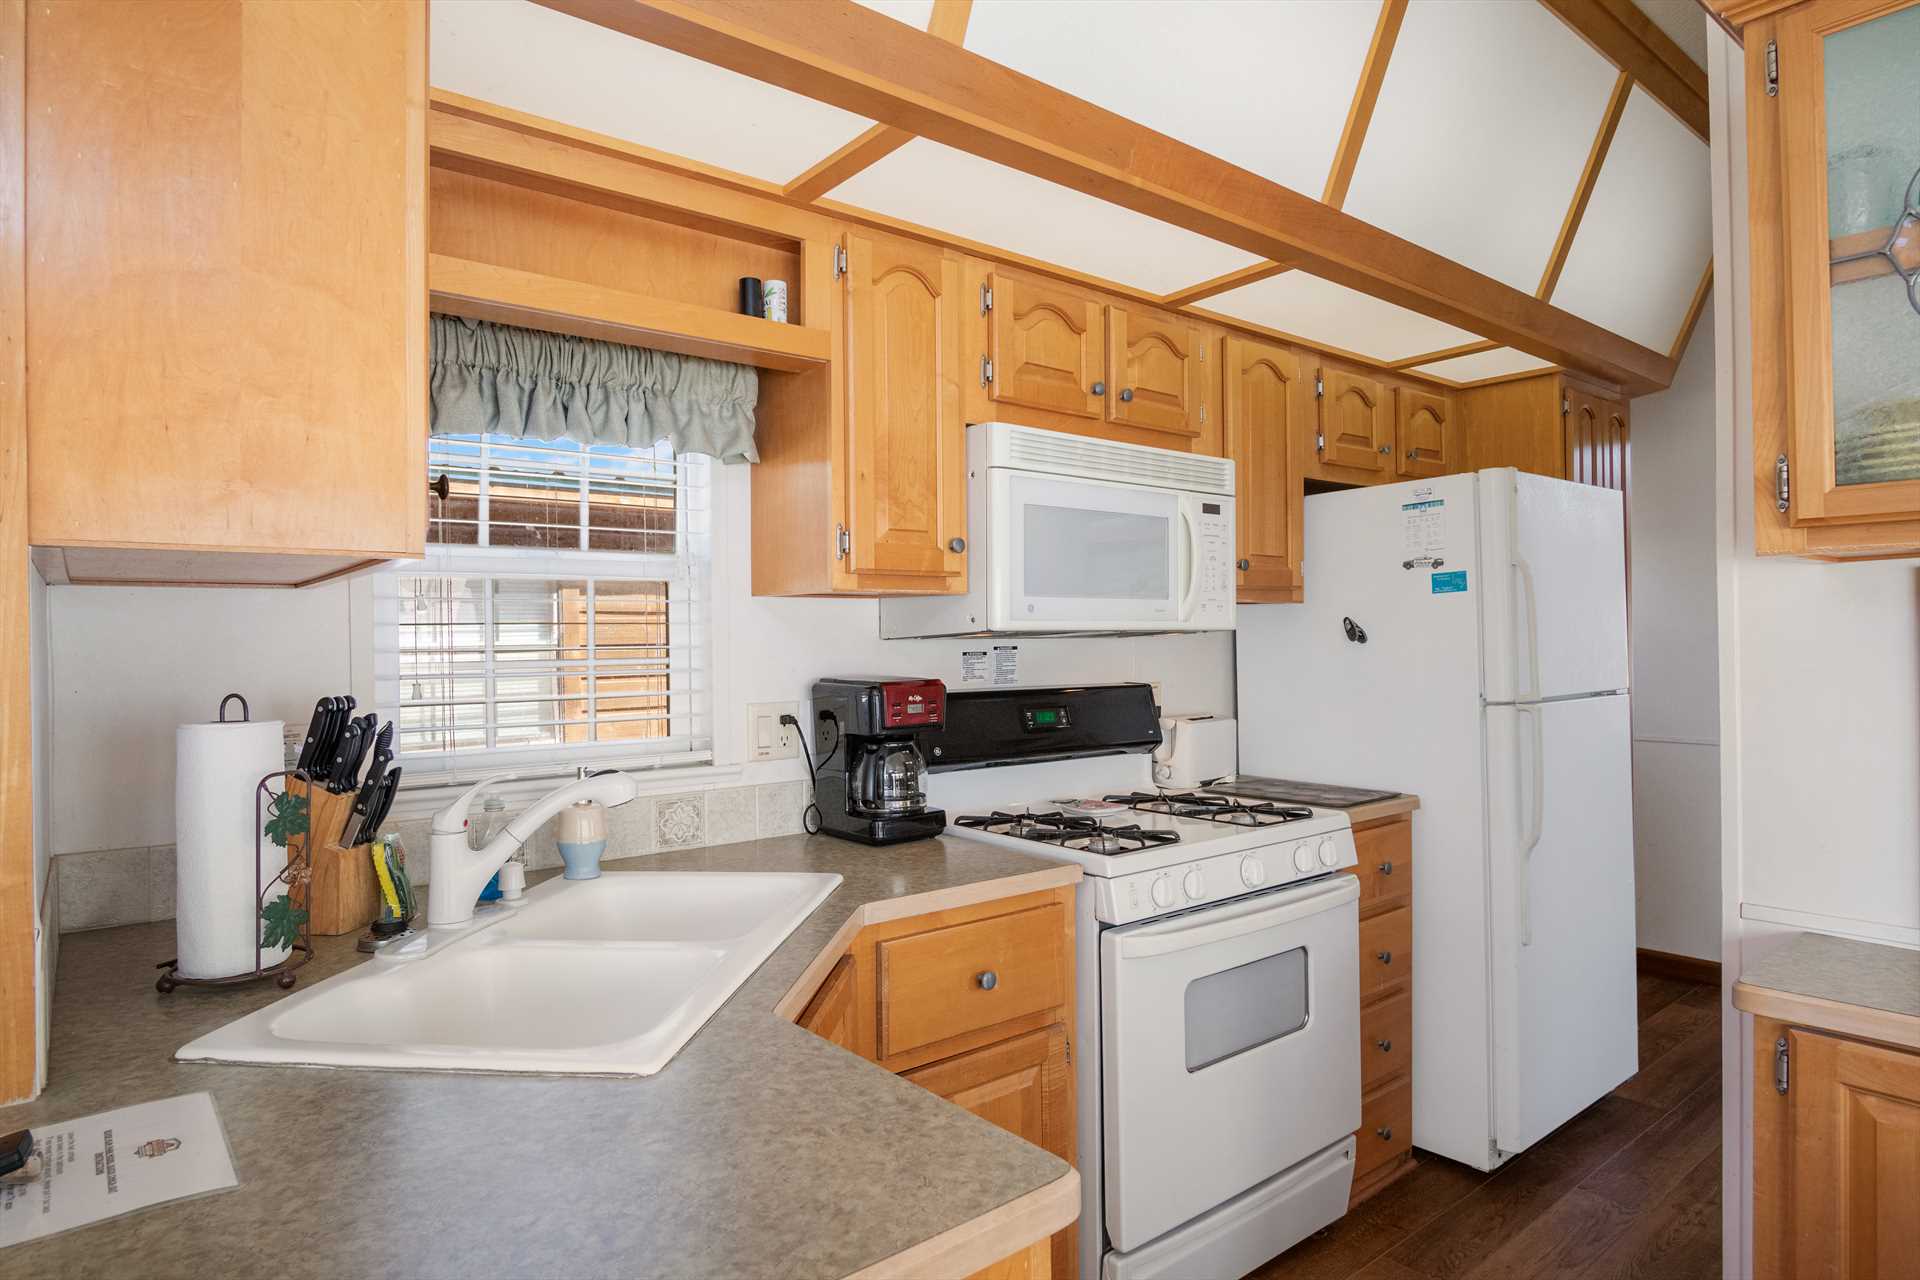                                                 The full kitchen here includes not only appliances and a coffee maker, but basic utensils, too.